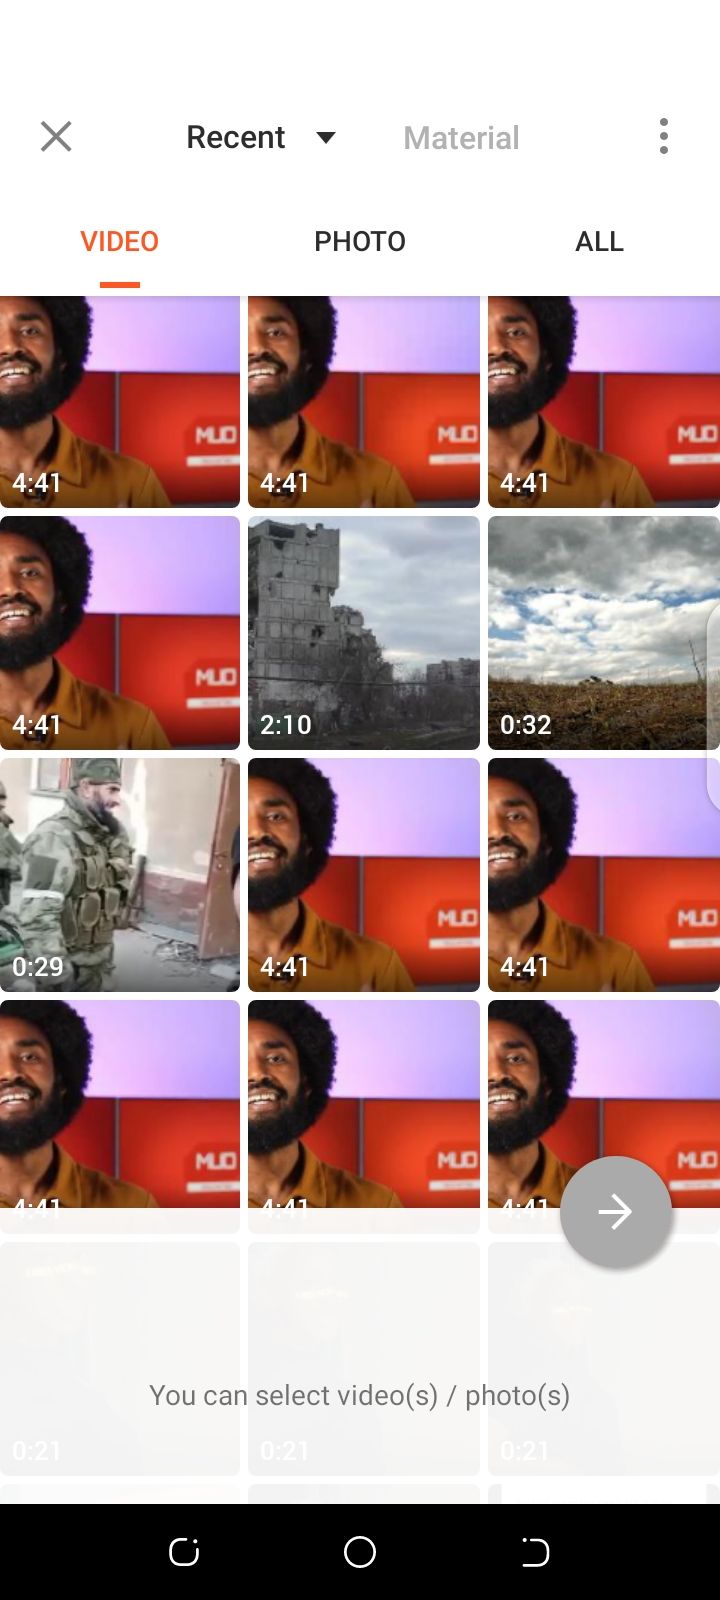 Selecting a video on the YouCut app